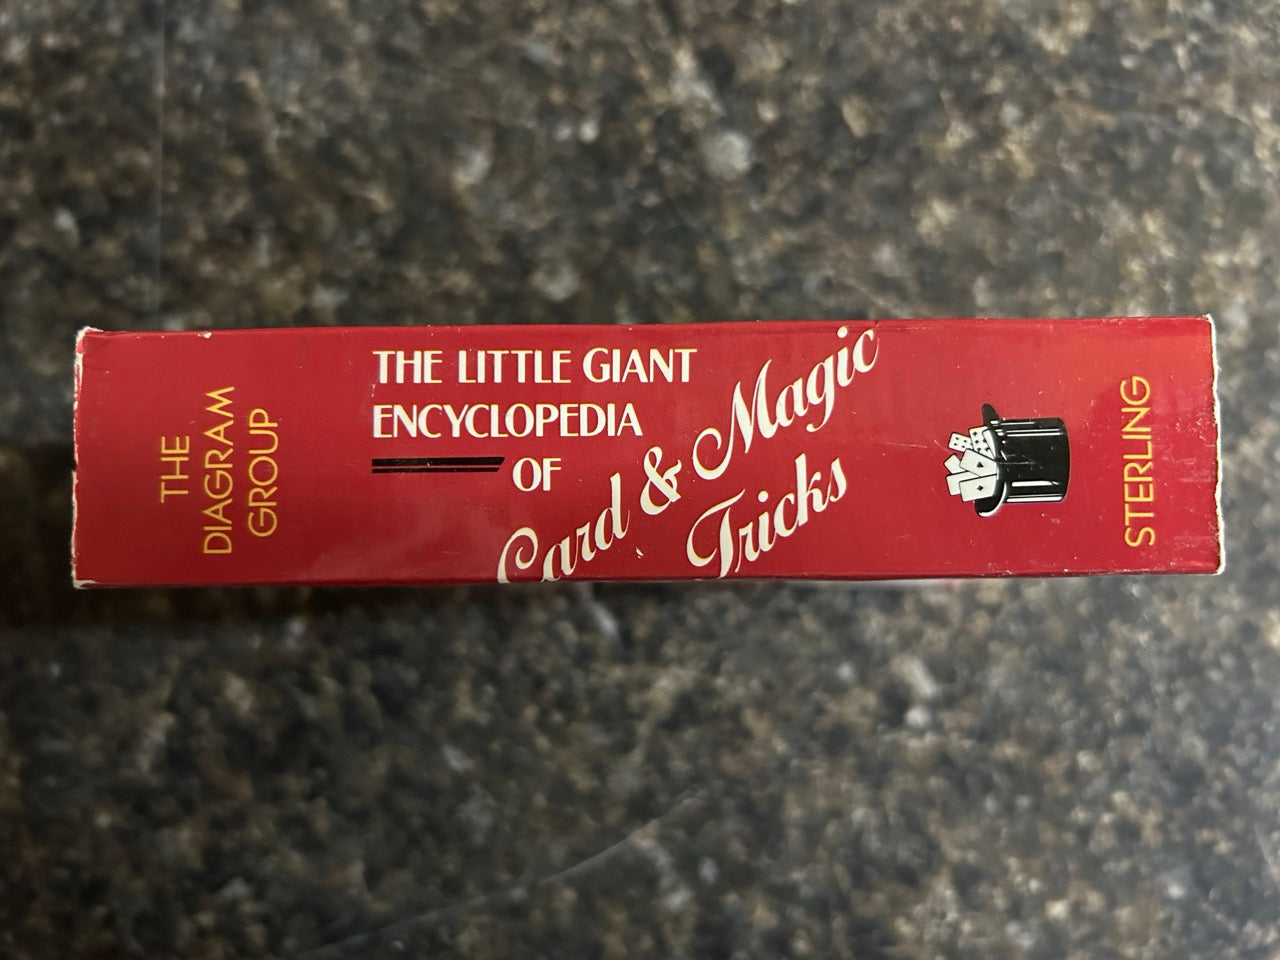 The Little Giant Encyclopedia of Card & Magic Tricks - Diagram Group